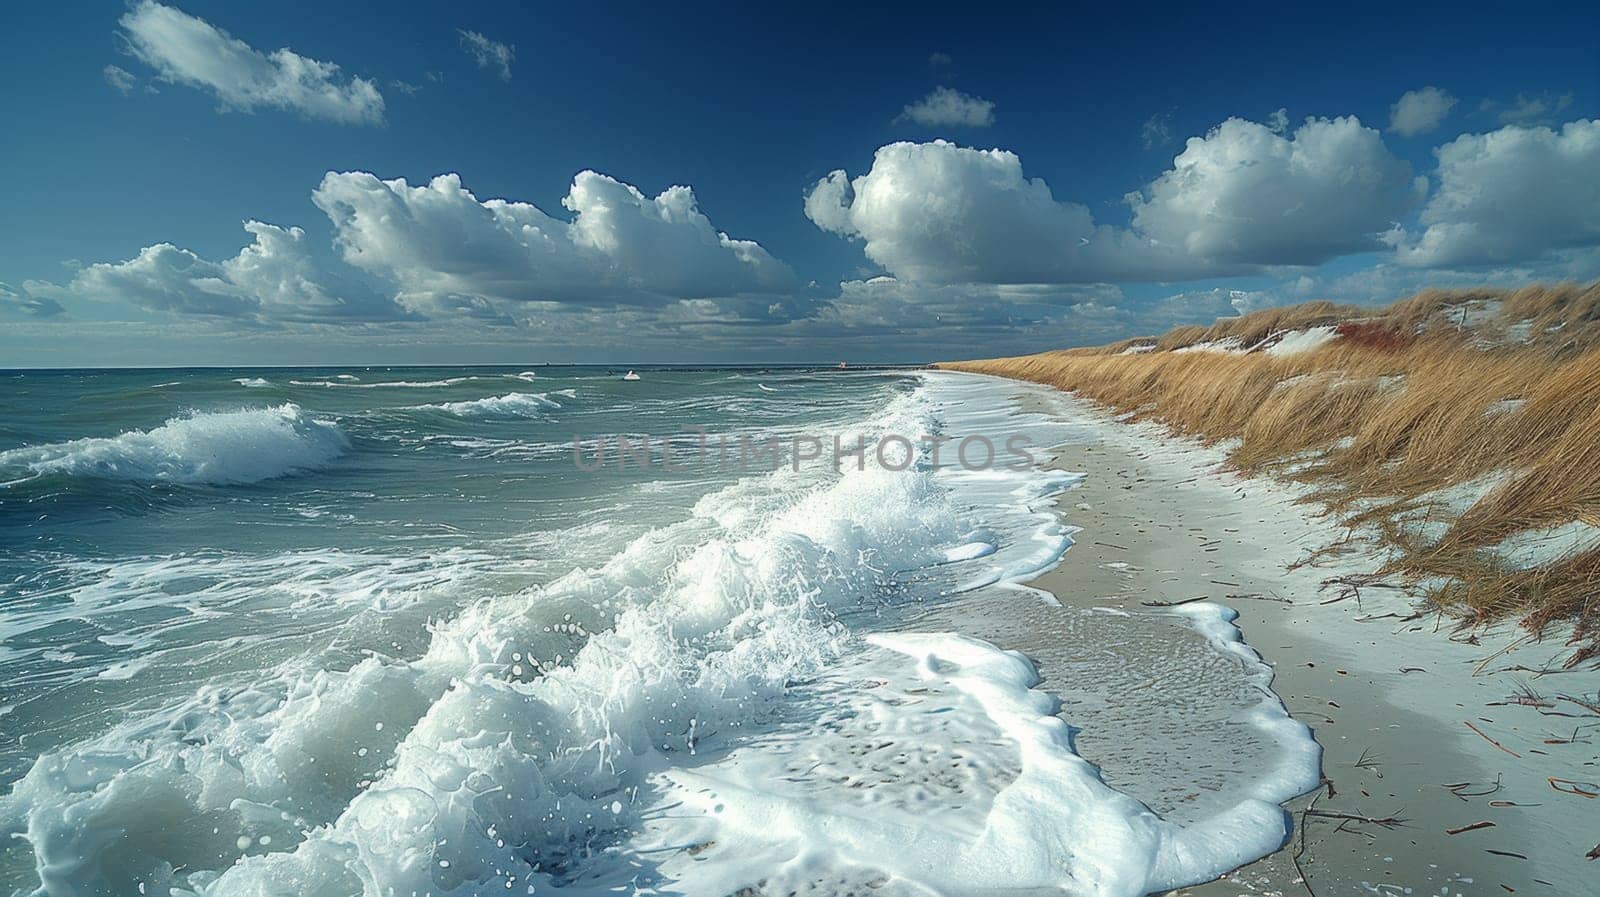 A beach with waves crashing on the shore and grasses blowing in the wind